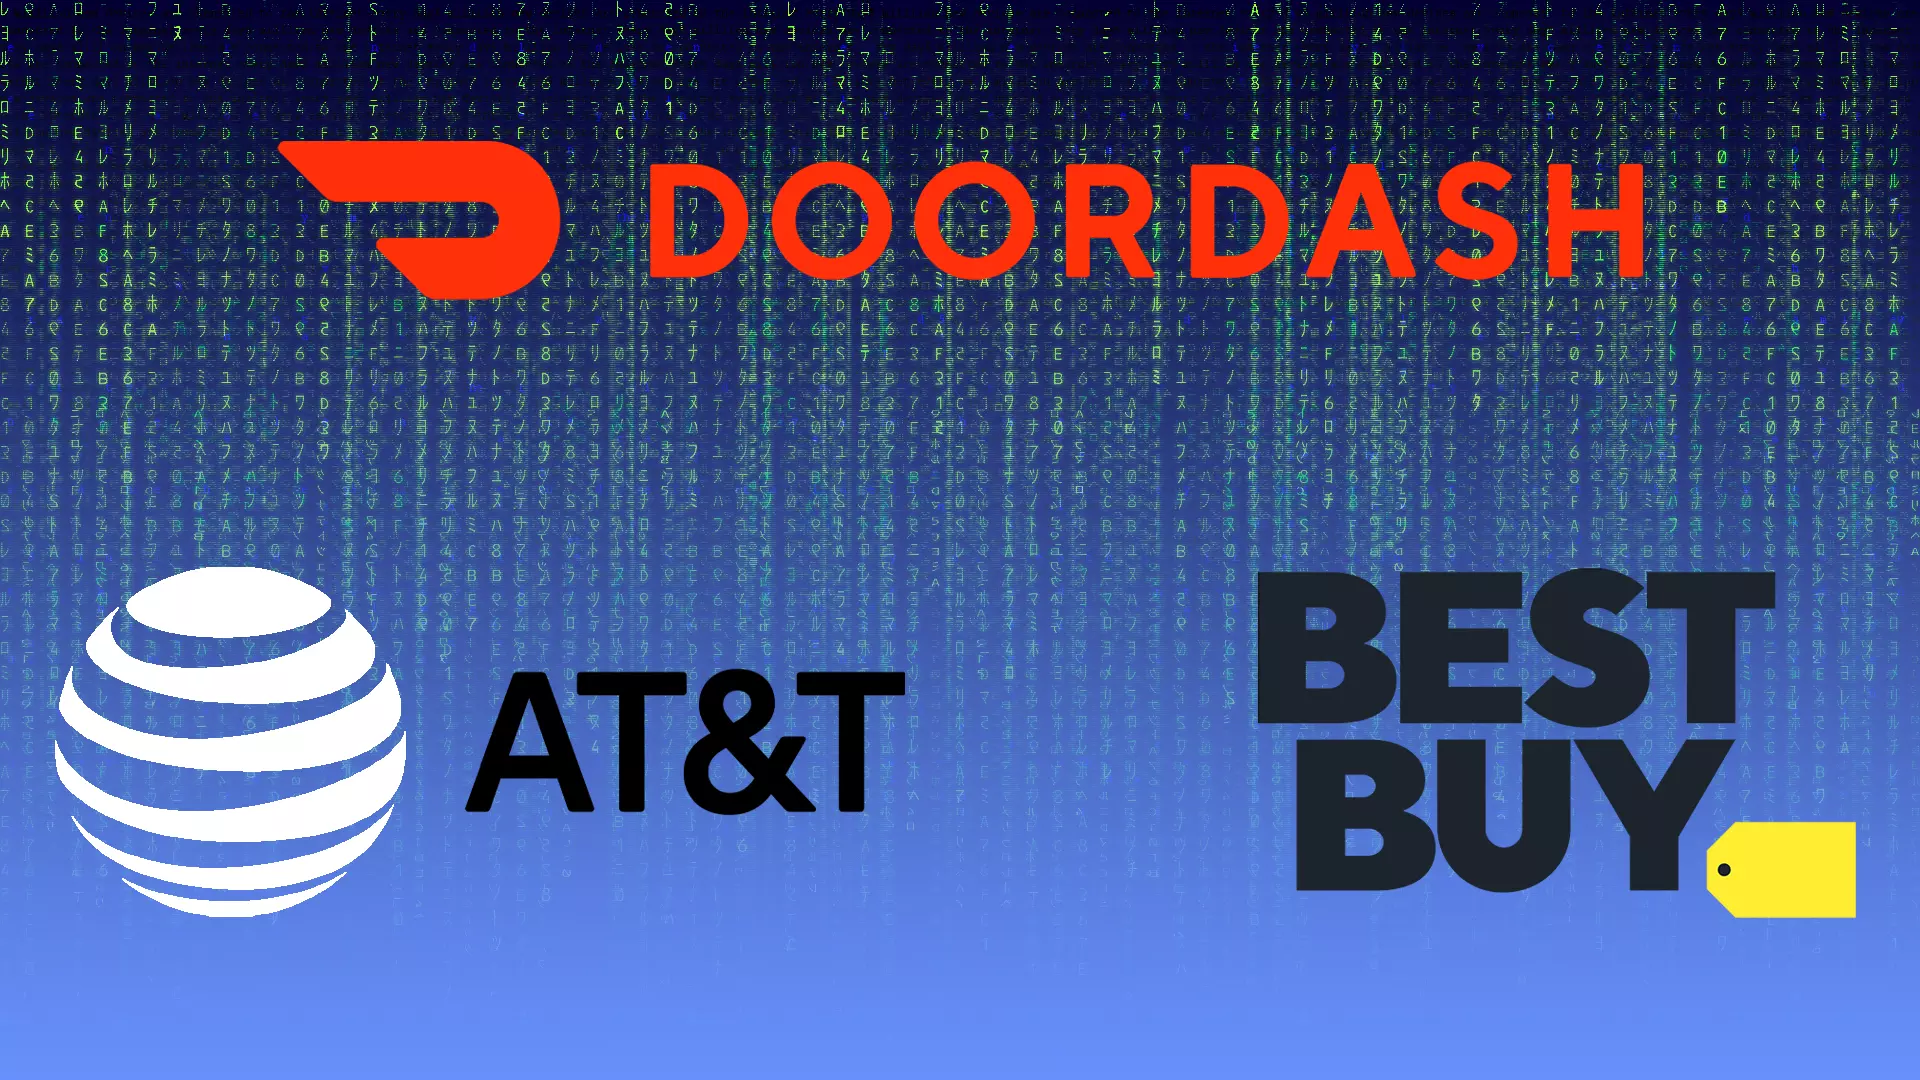 A massive phishing attack affected more than 130 companies, including Best Buy, DoorDash, and AT&T